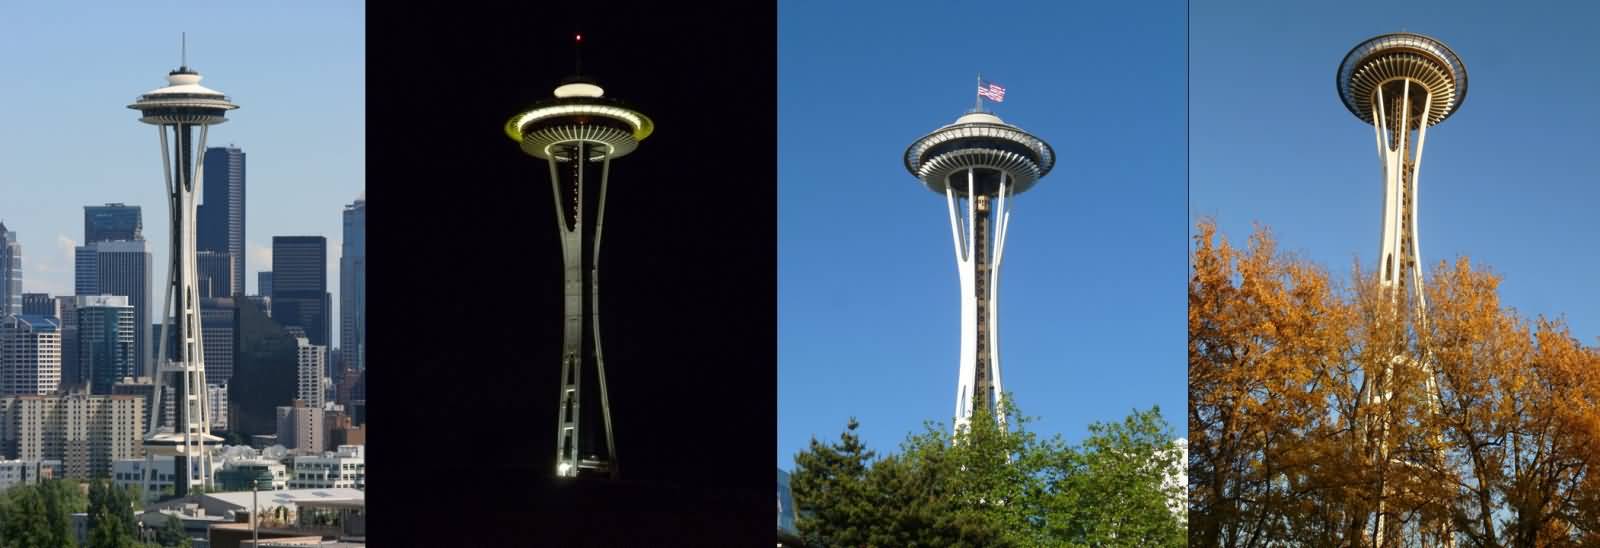 Four View Of Space Needle Tower